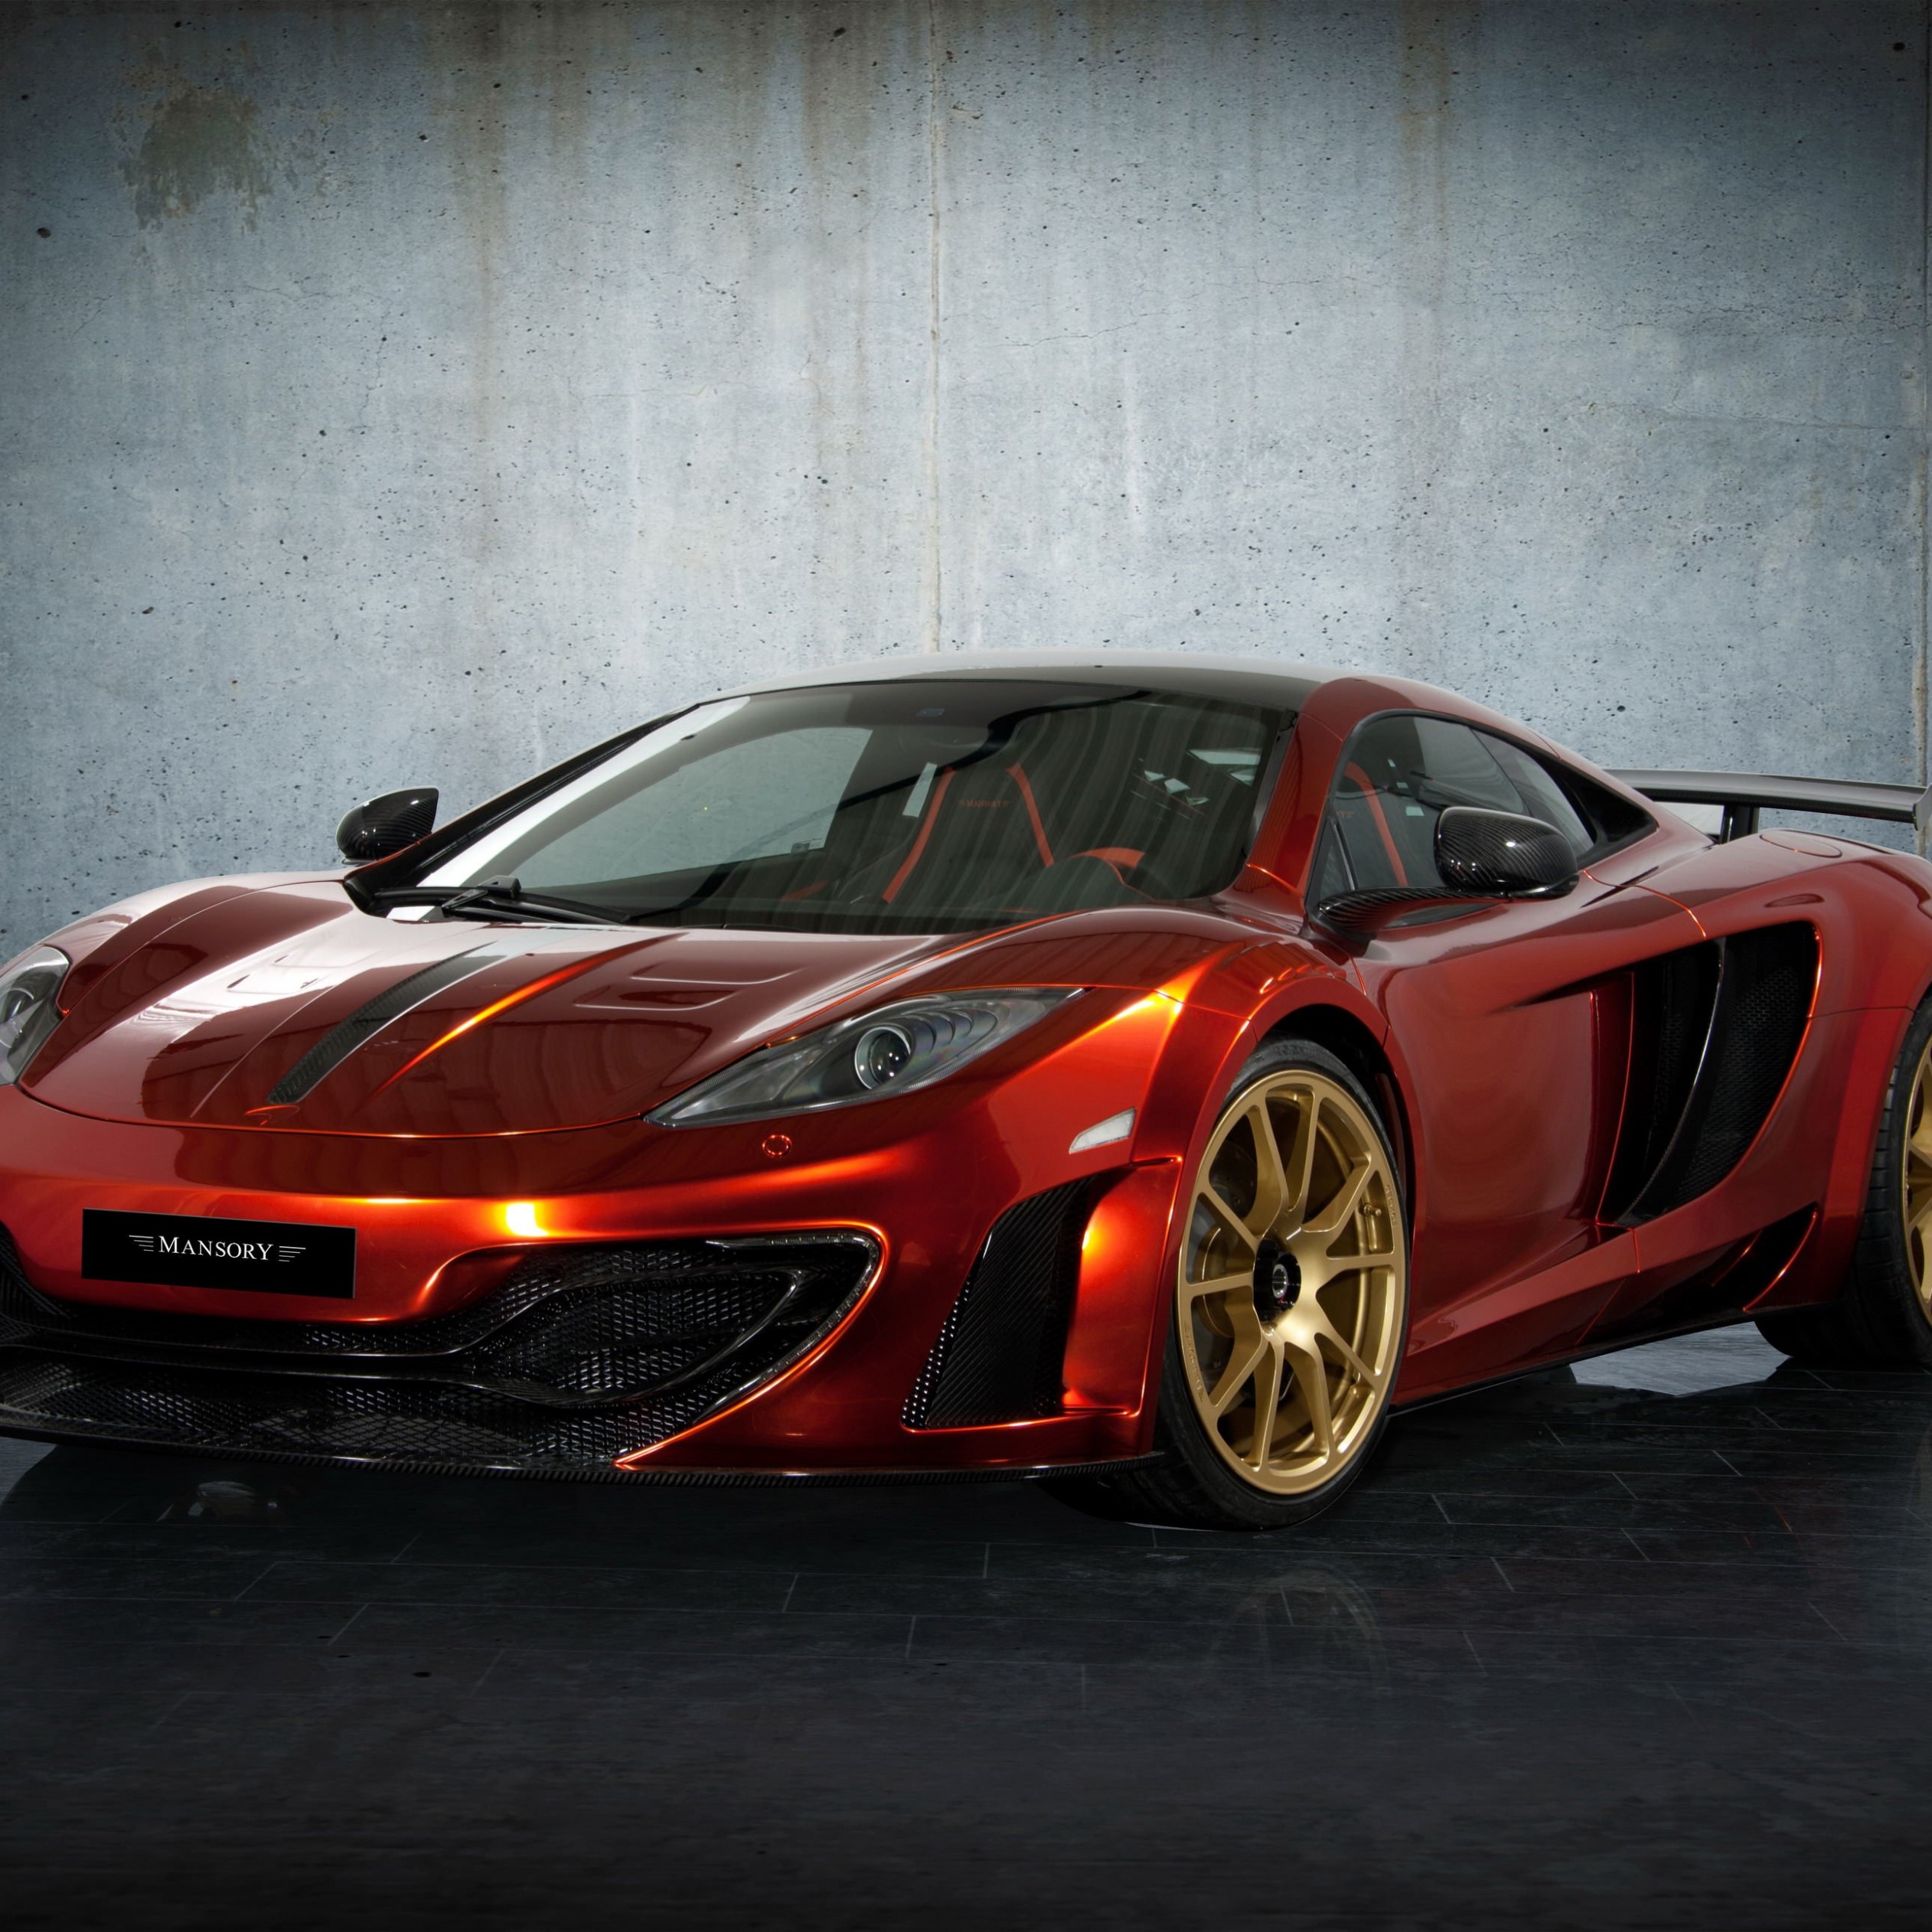 McLaren MP4-12Cf By Mansory Wallpaper for Apple iPad 3